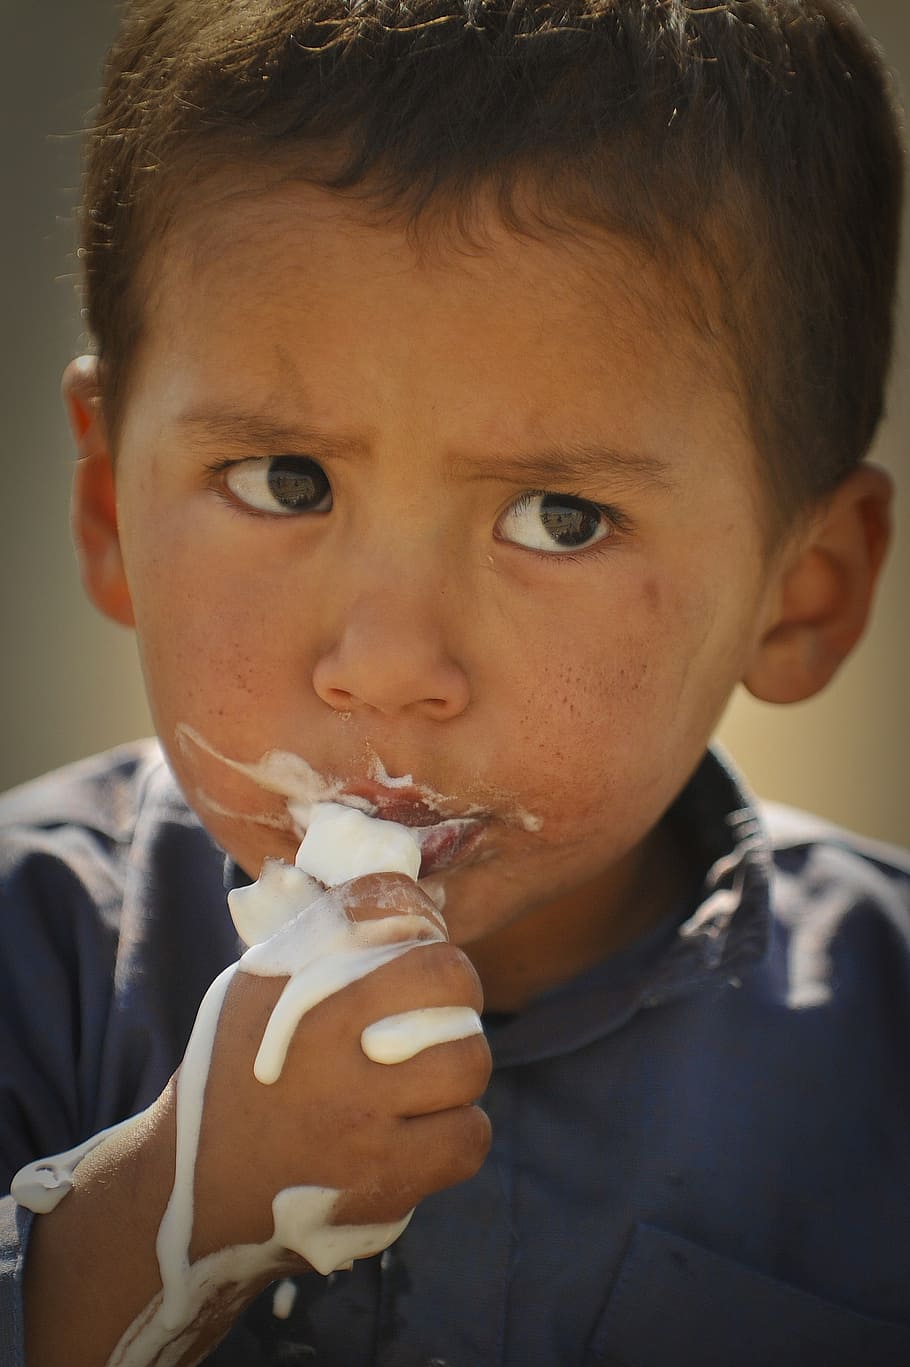 child eating cream, boy, eating, ice cream, child, kid, messy, cute, young, hungry